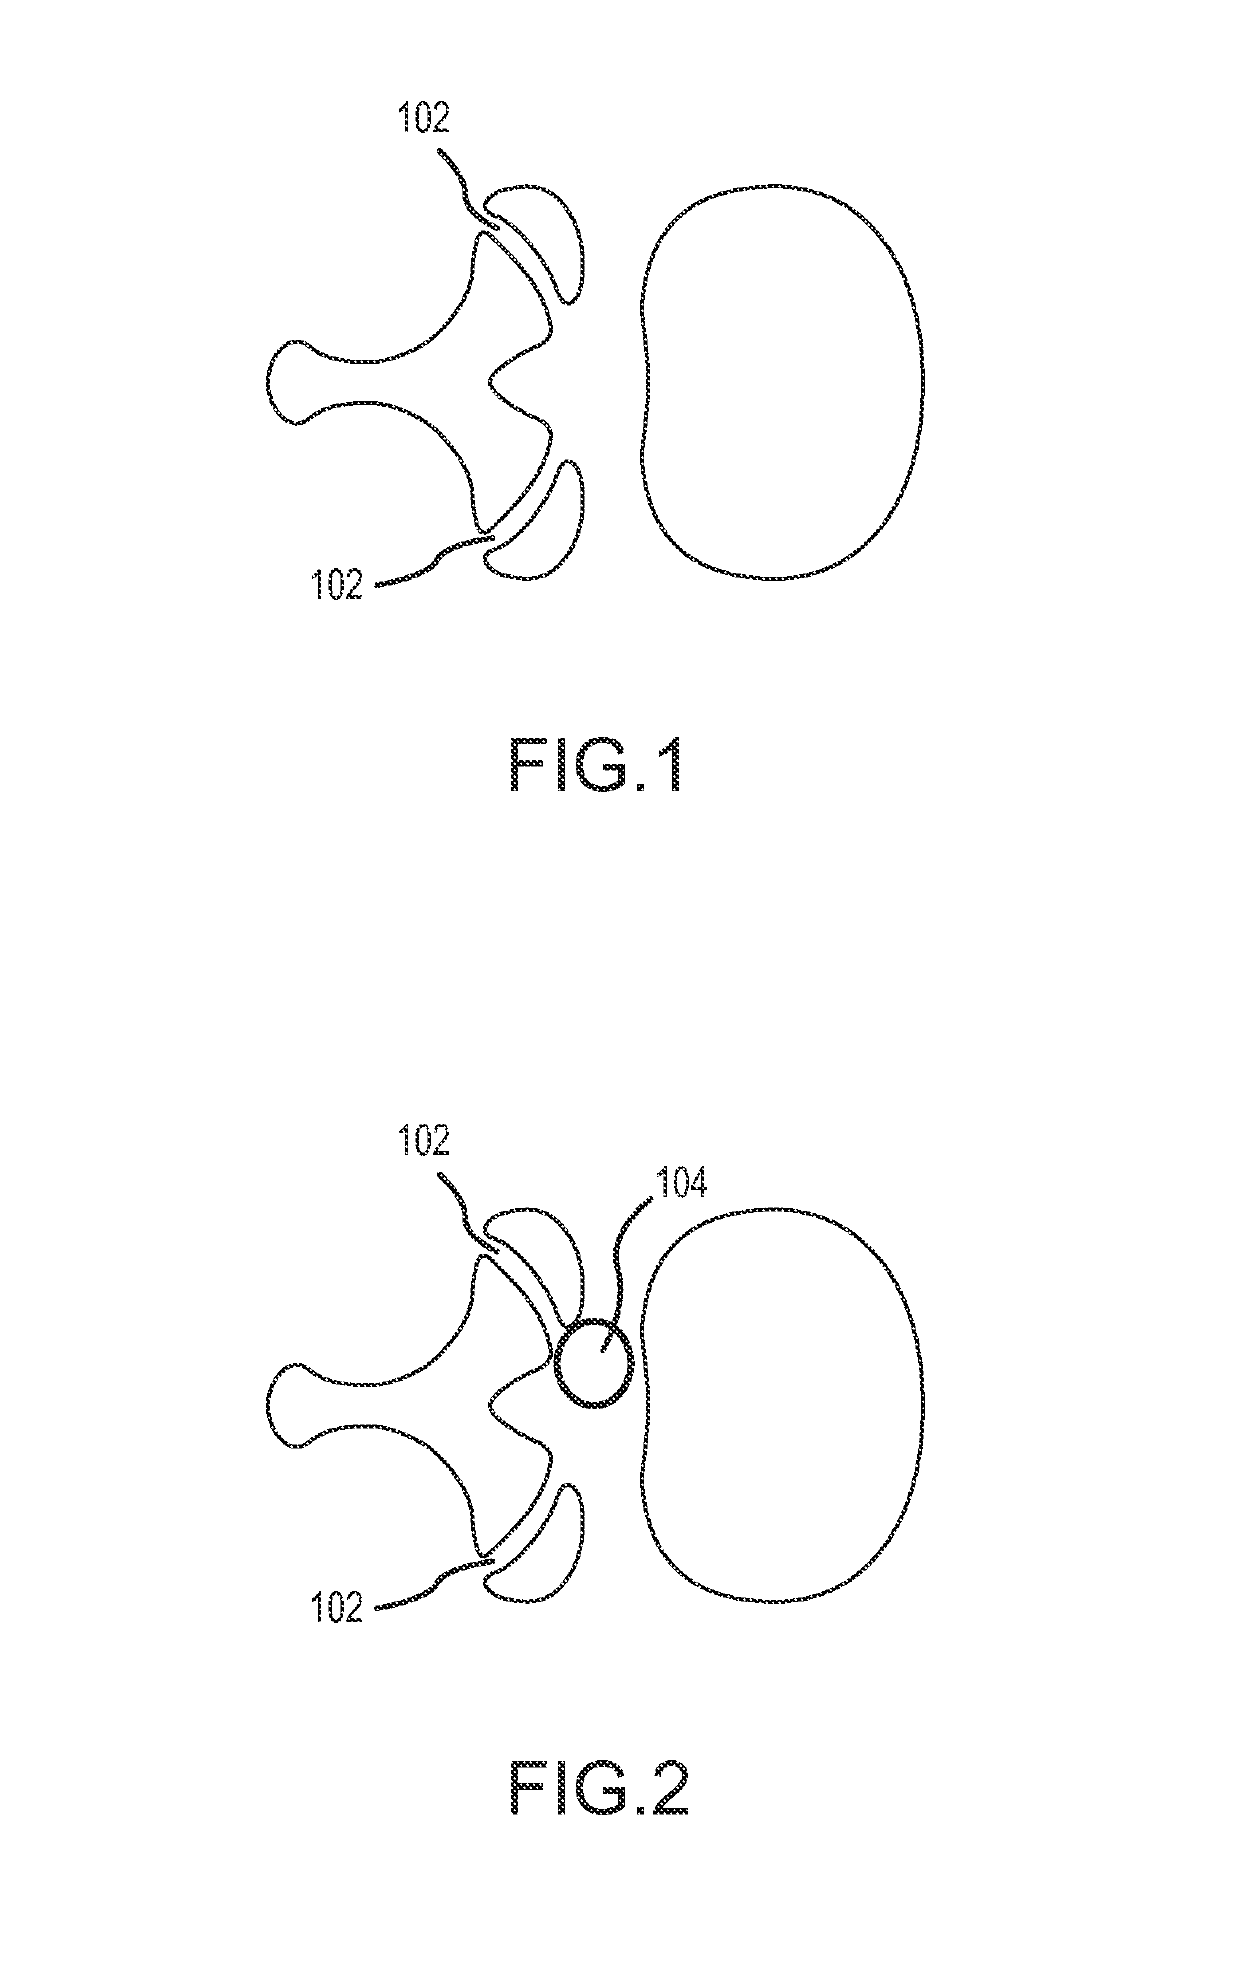 Devices, kits and methods relating to treatment of facet joints